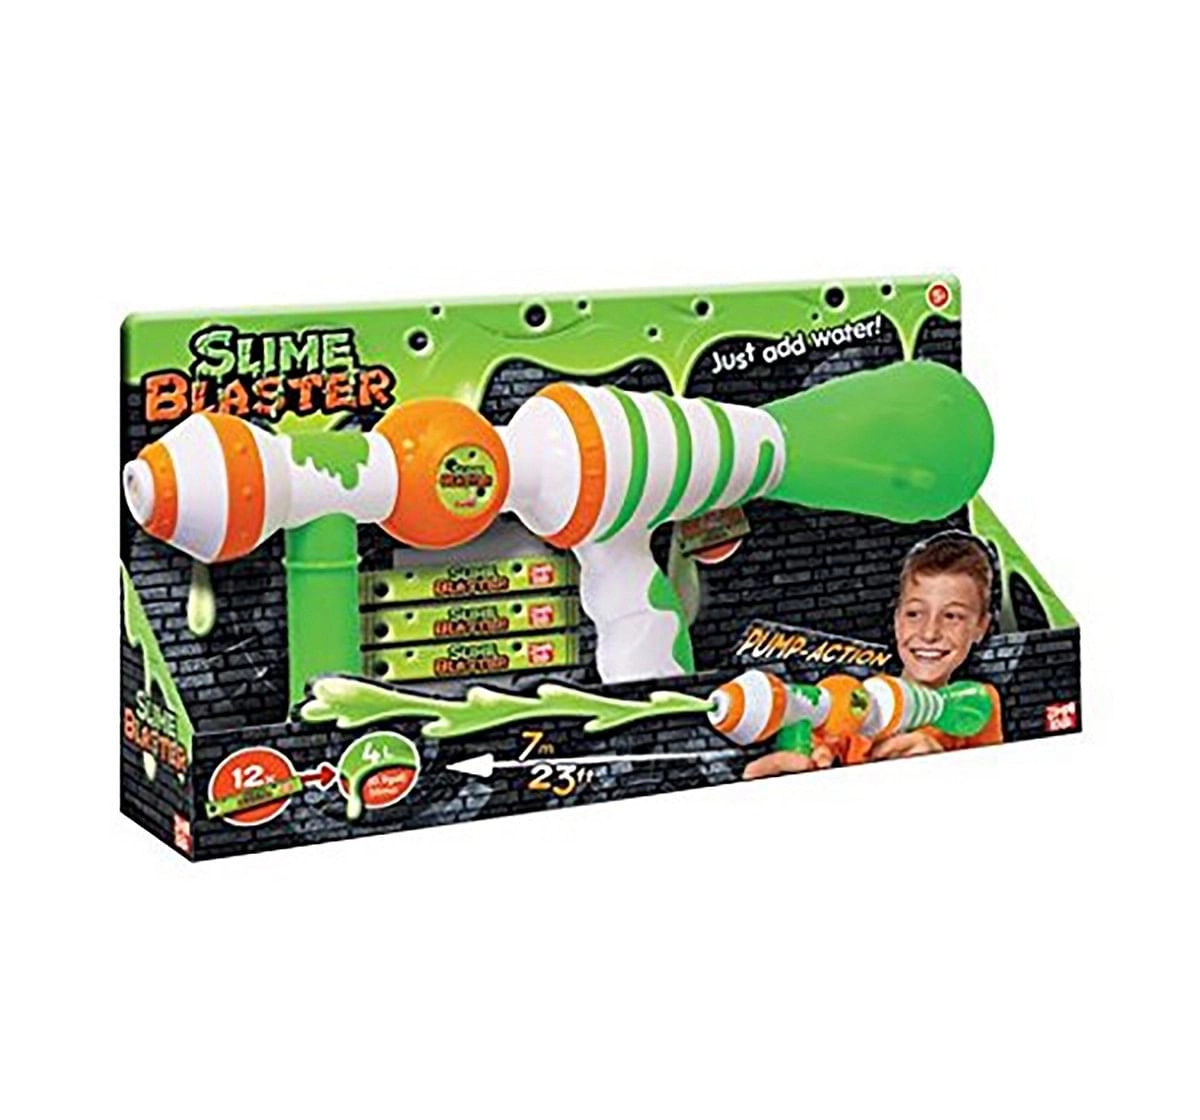 Simba Another Fantastic Addition To Your Water Fight Arsenal 30 Sachet Refill Pack Blasters for Kids age 3Y+ 